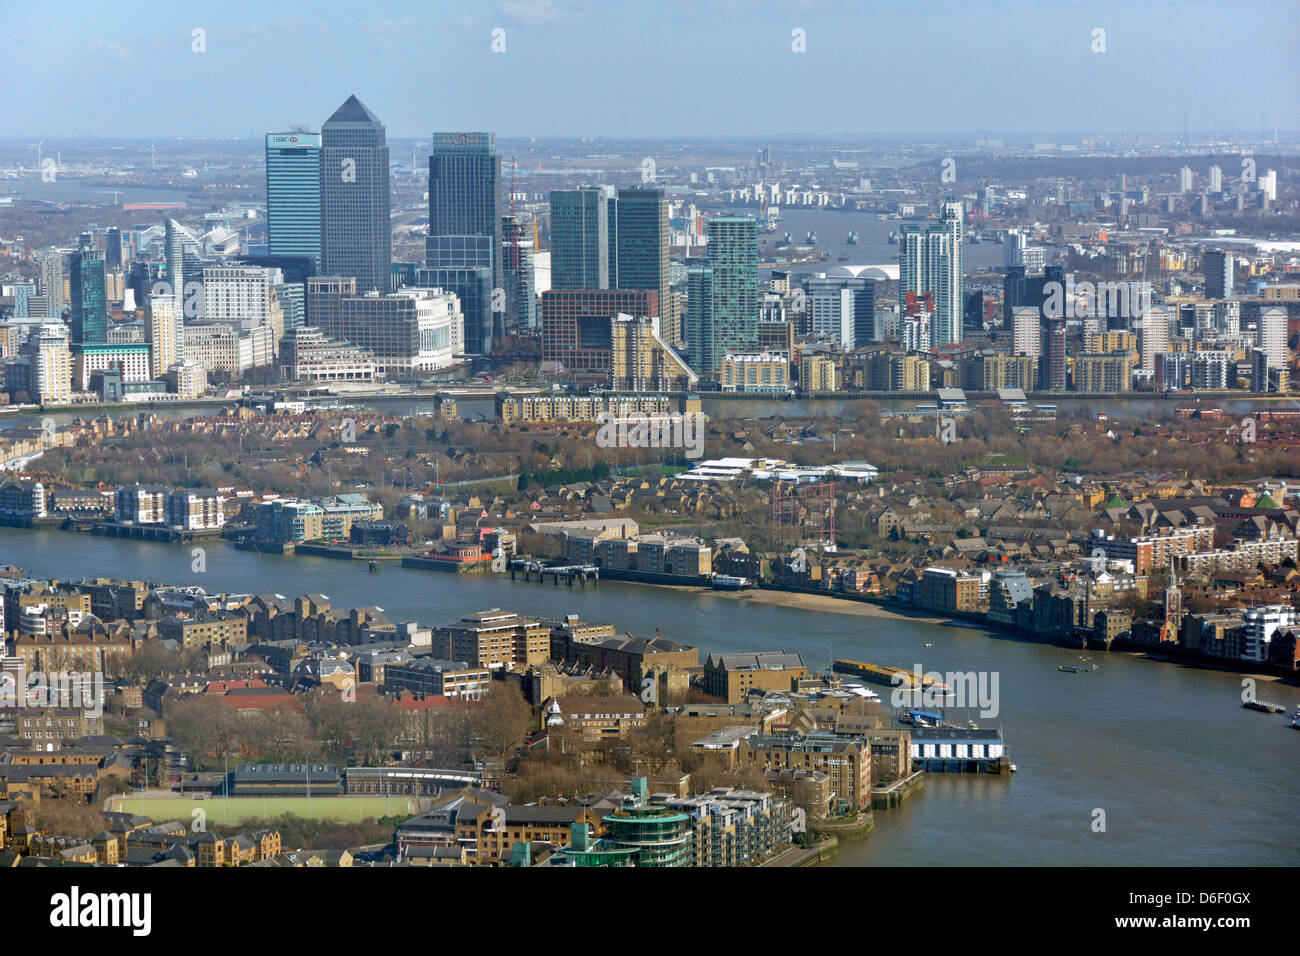 Aerial view London urban landscape & cityscape landmarks at Canary Wharf skyline bends in River Thames flood barrier piers distant England UK Stock Photo